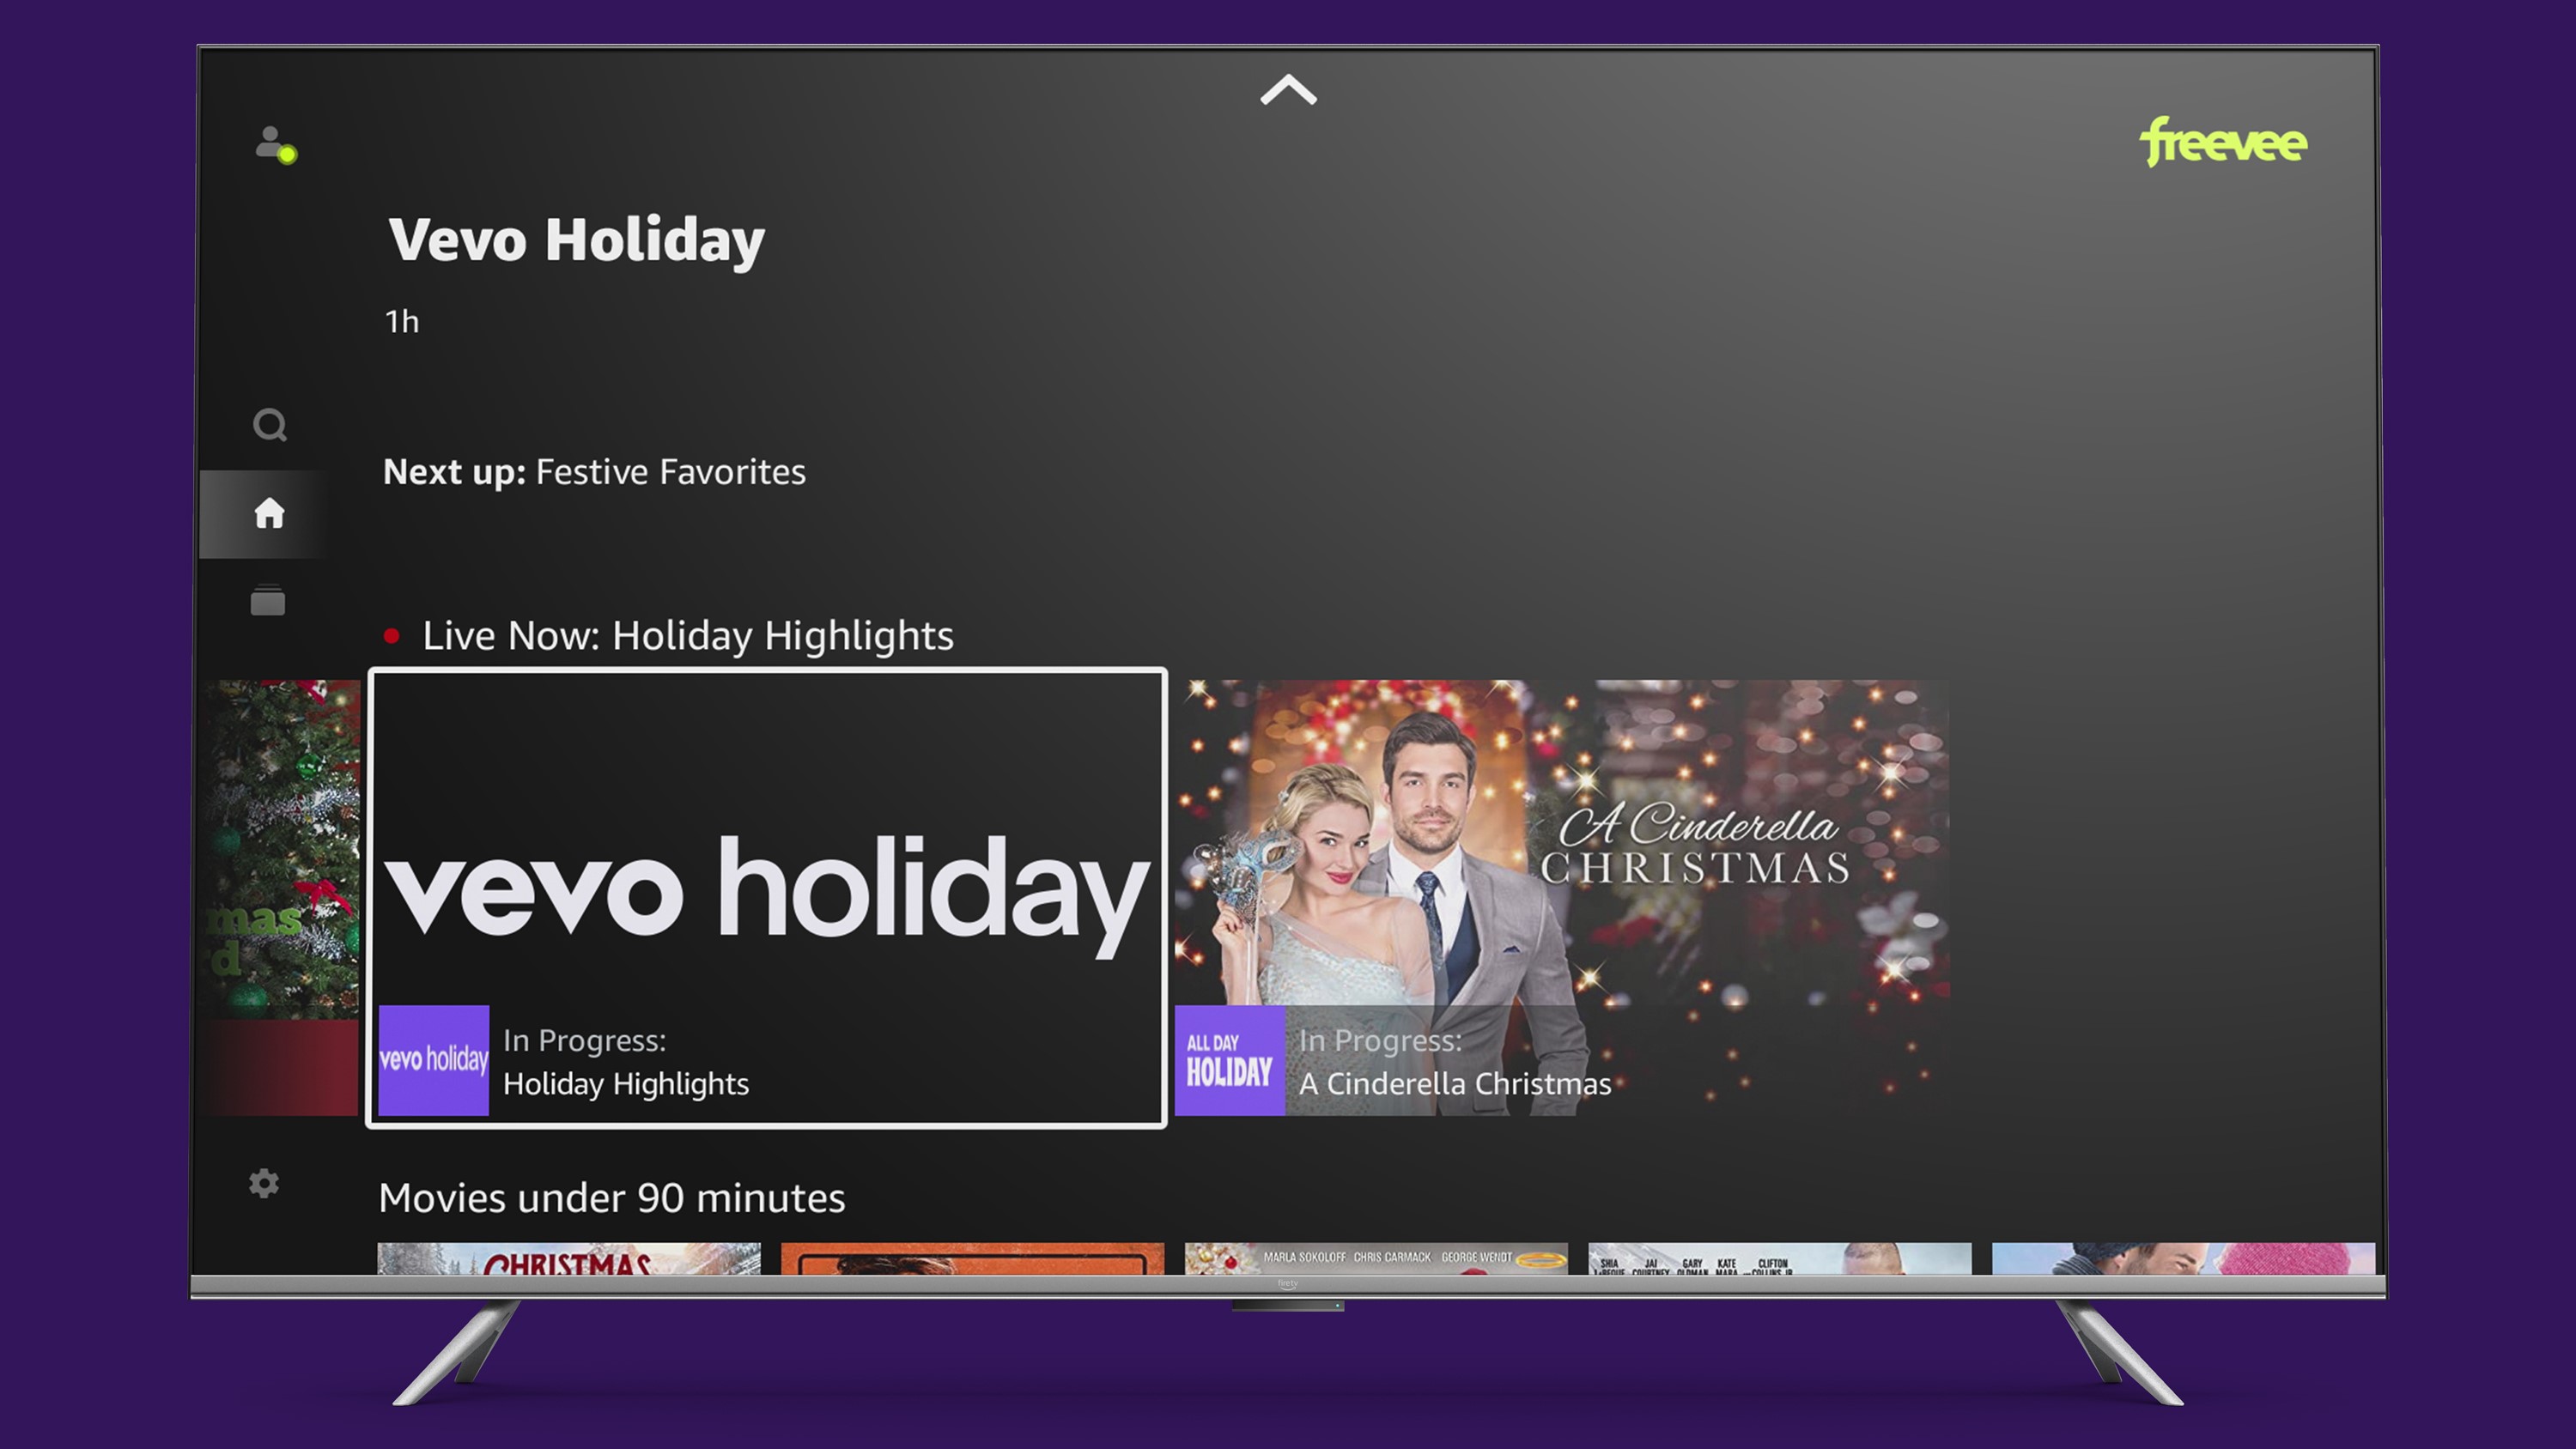 Music Service Vevo Launches Channels on Amazons Freevee Next TV